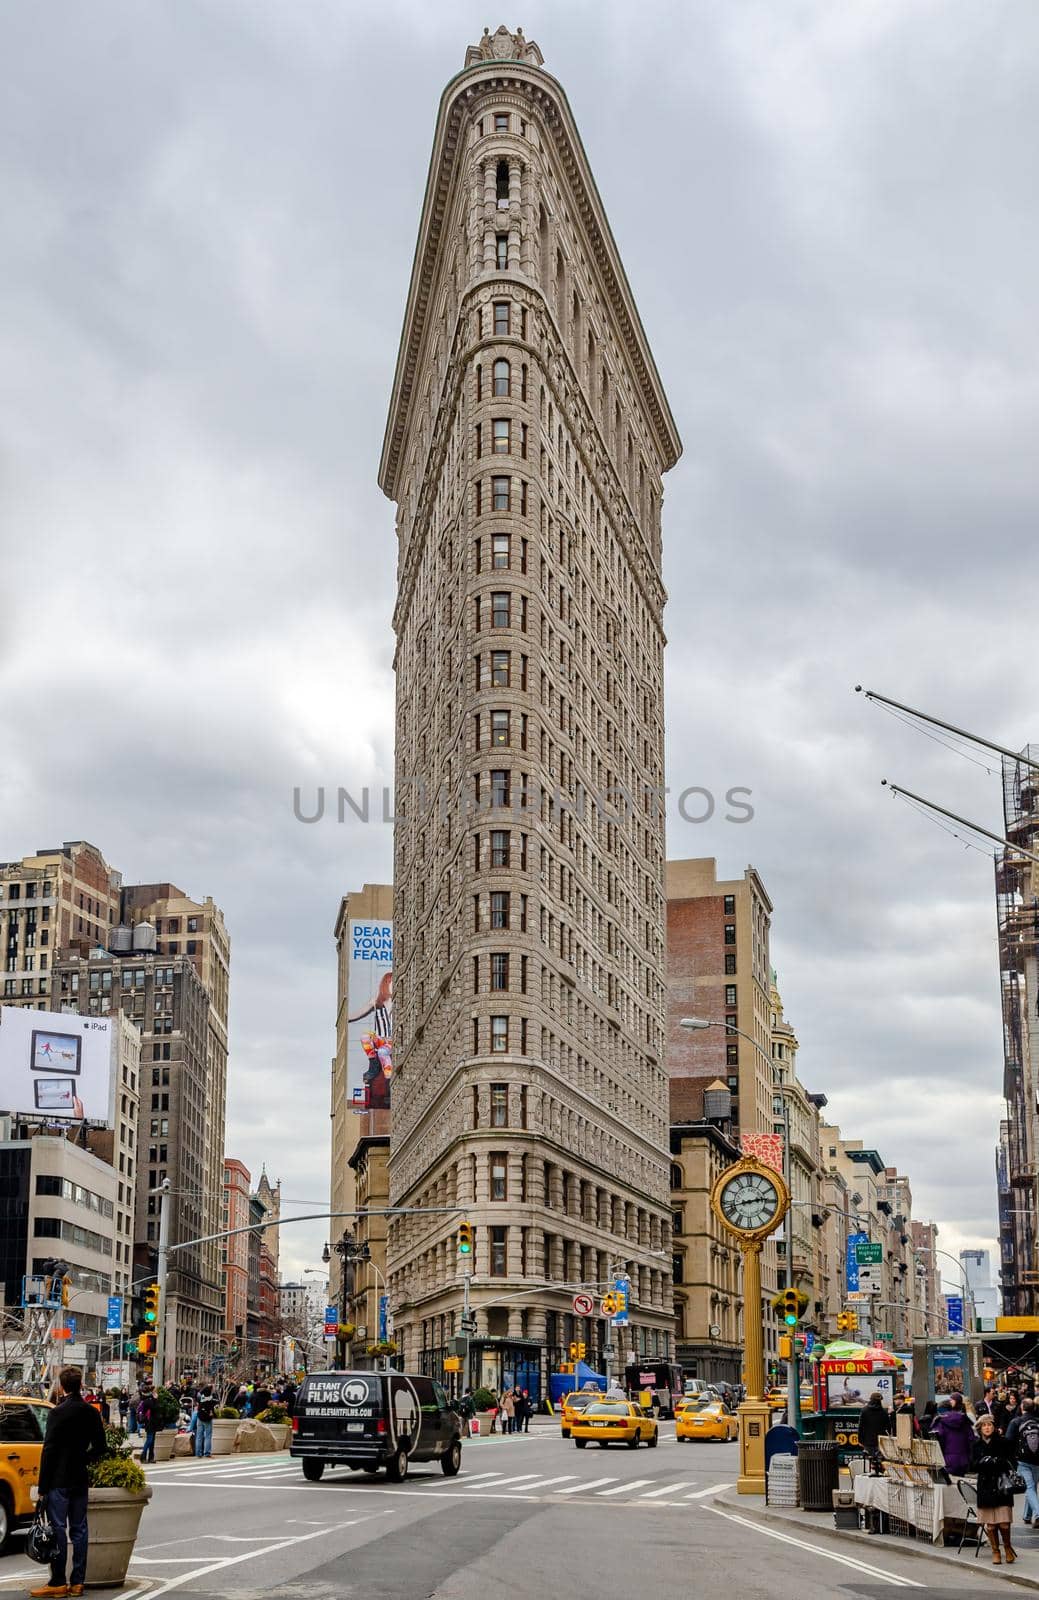 Flatiron Building New York City with street and yellow taxi cabs in forefront by bildgigant